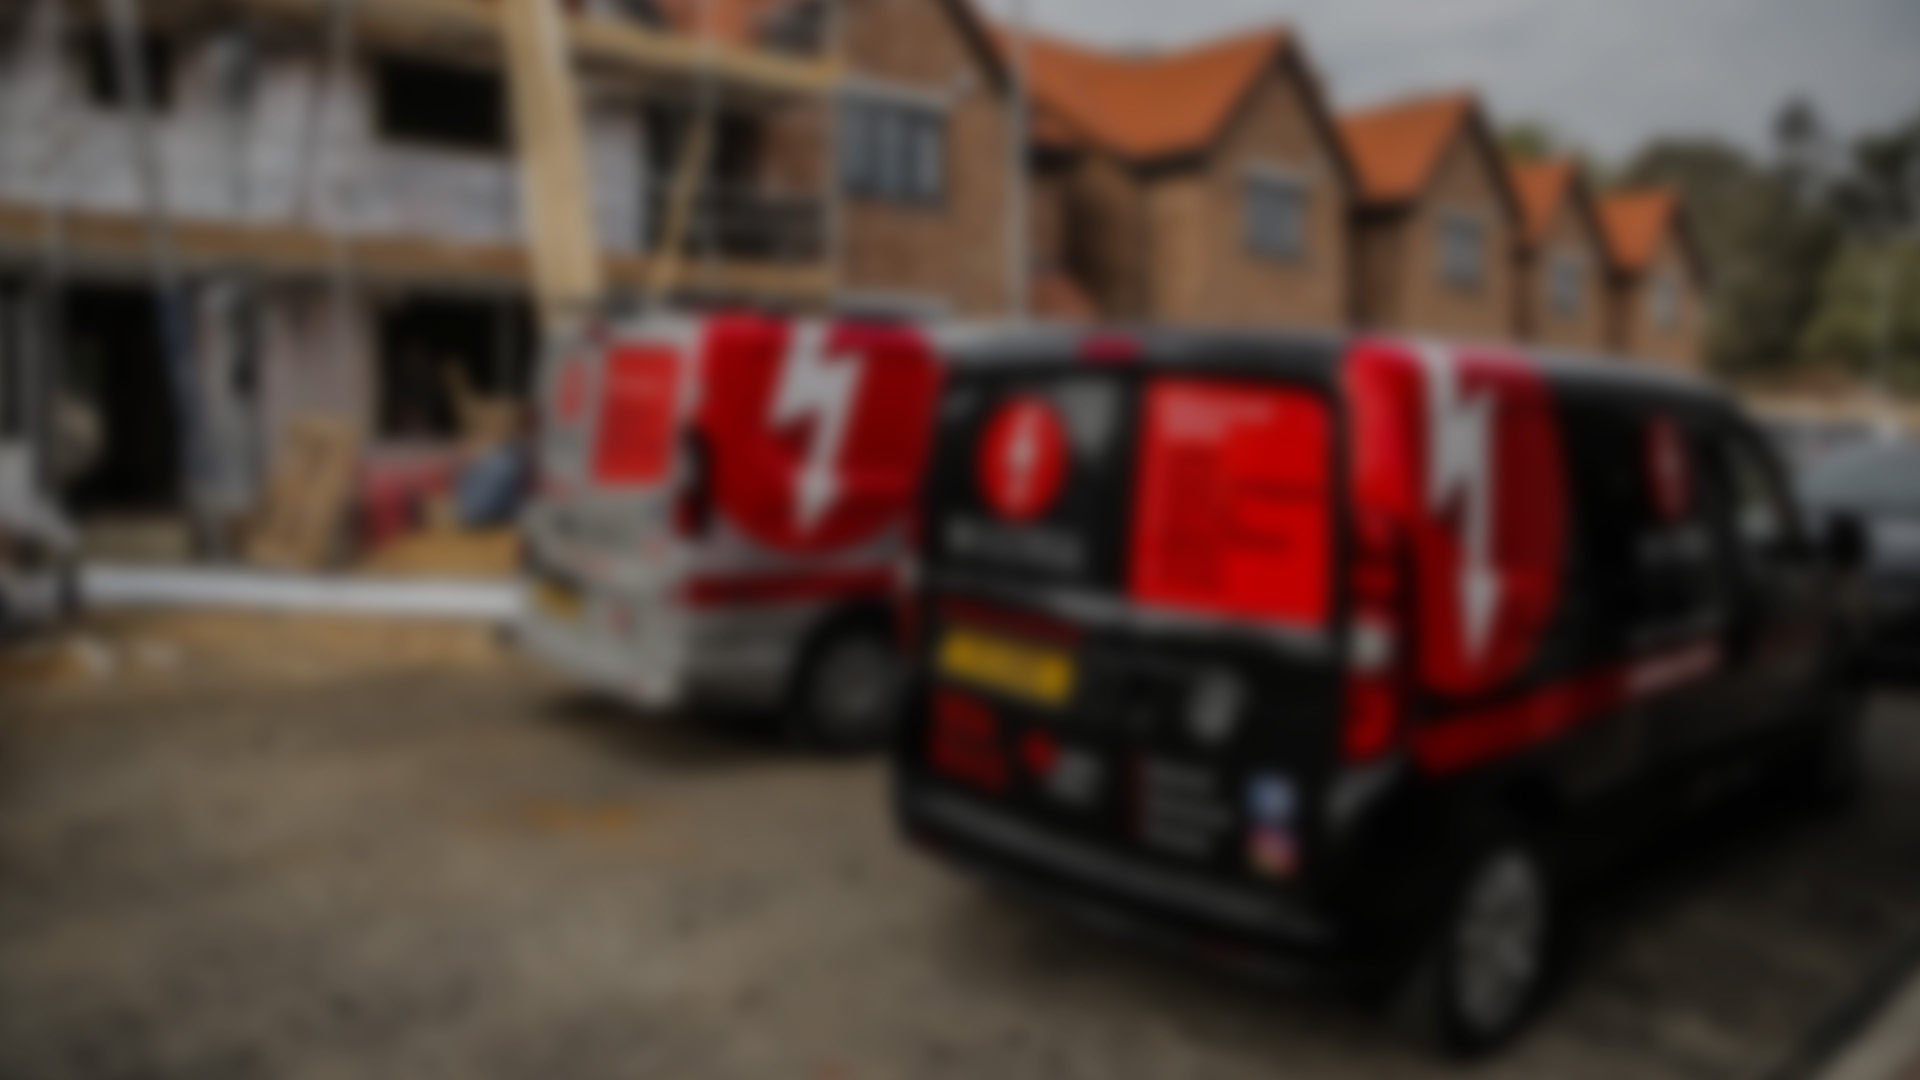 Cover Image. DH Electrical vans outside new build property